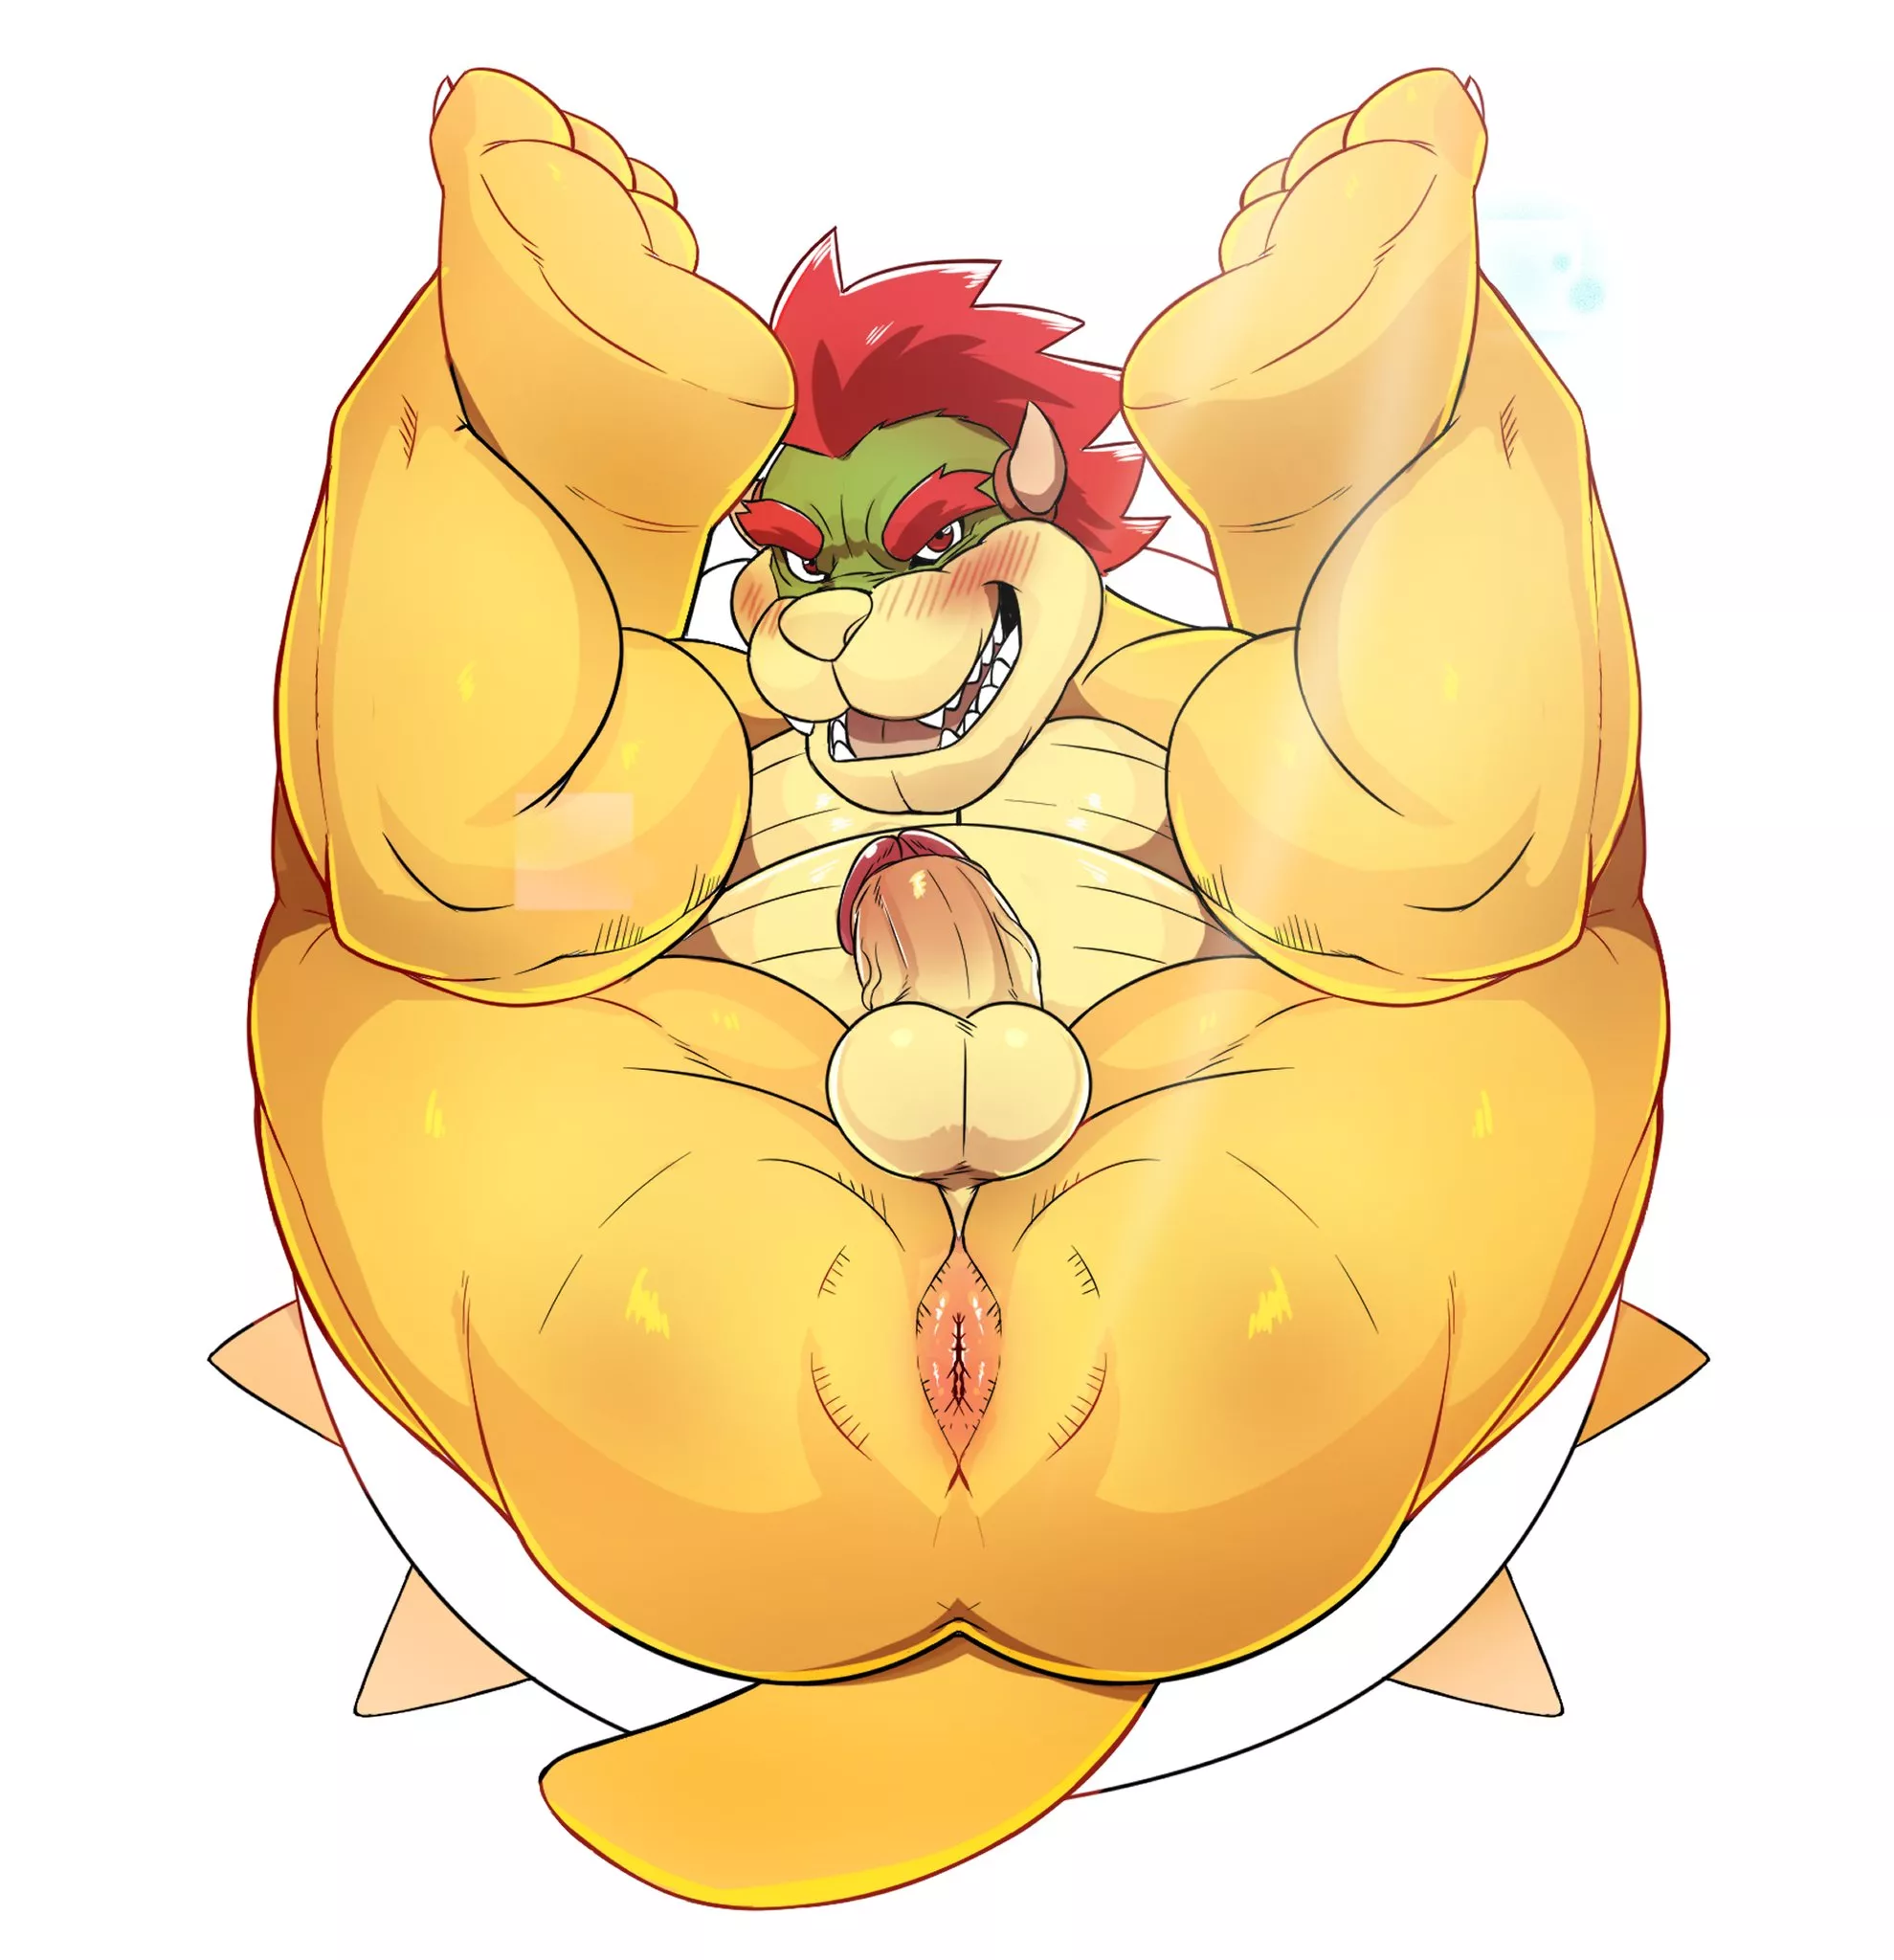 Bowser nude